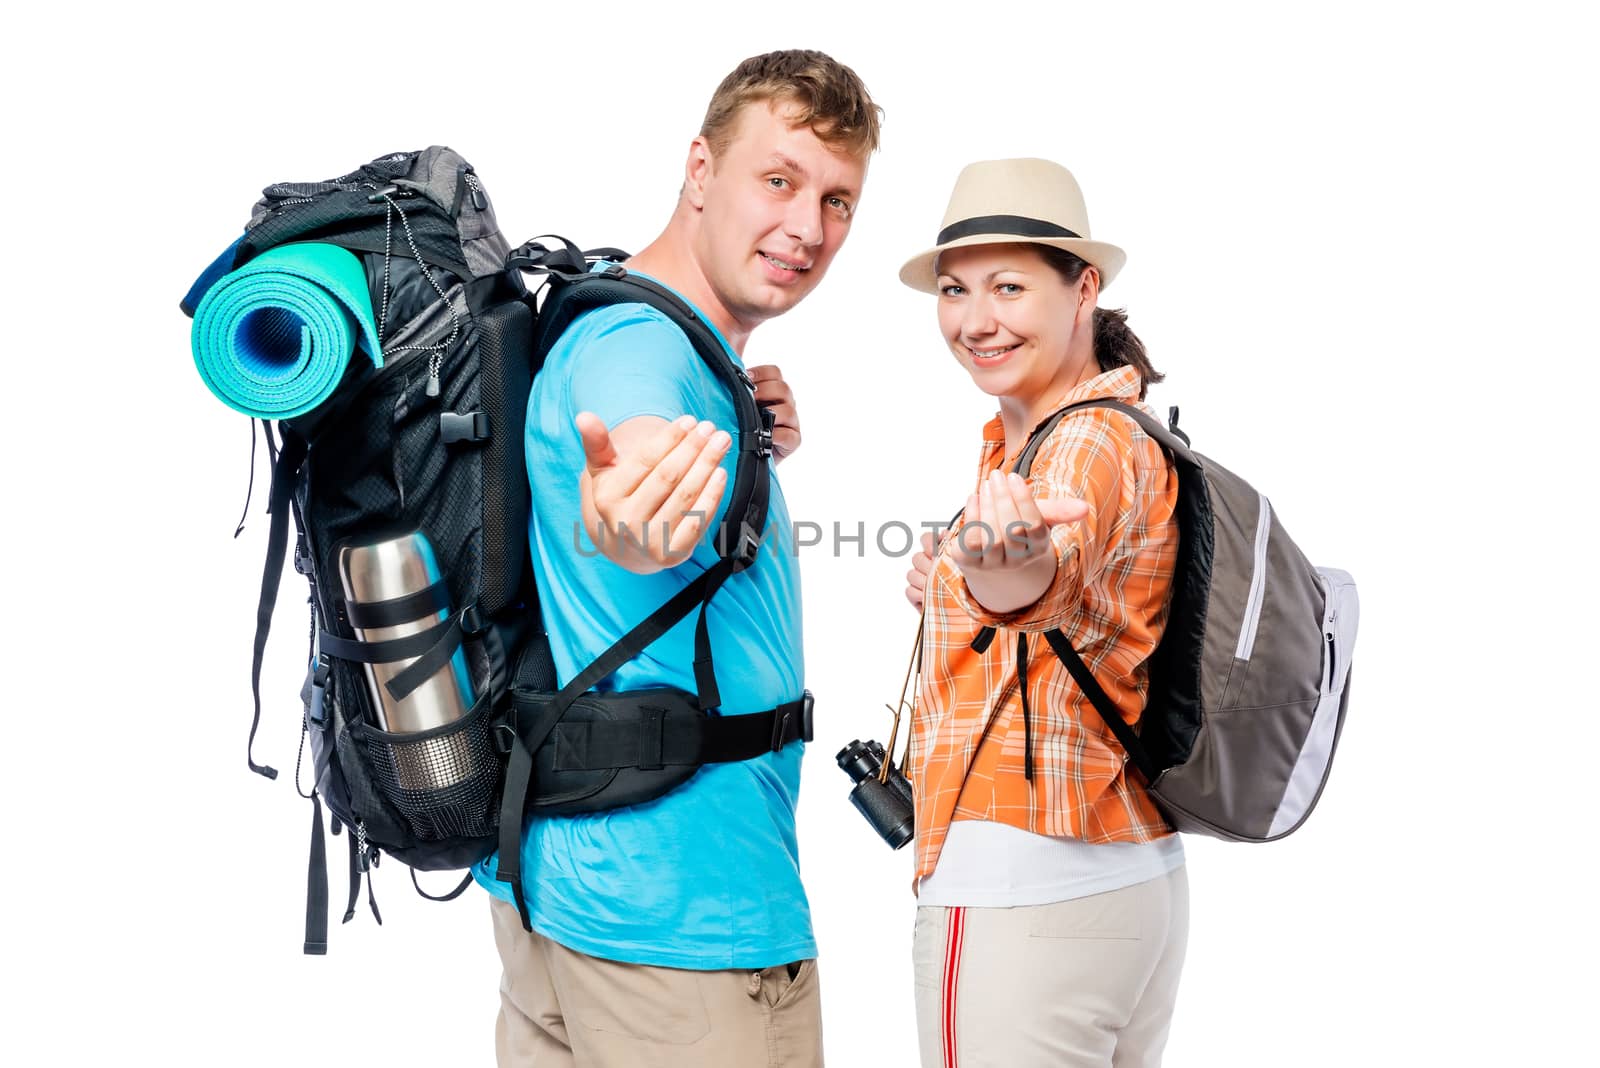 Follow us! A couple of tourists are invited to go camping with them, on a white background